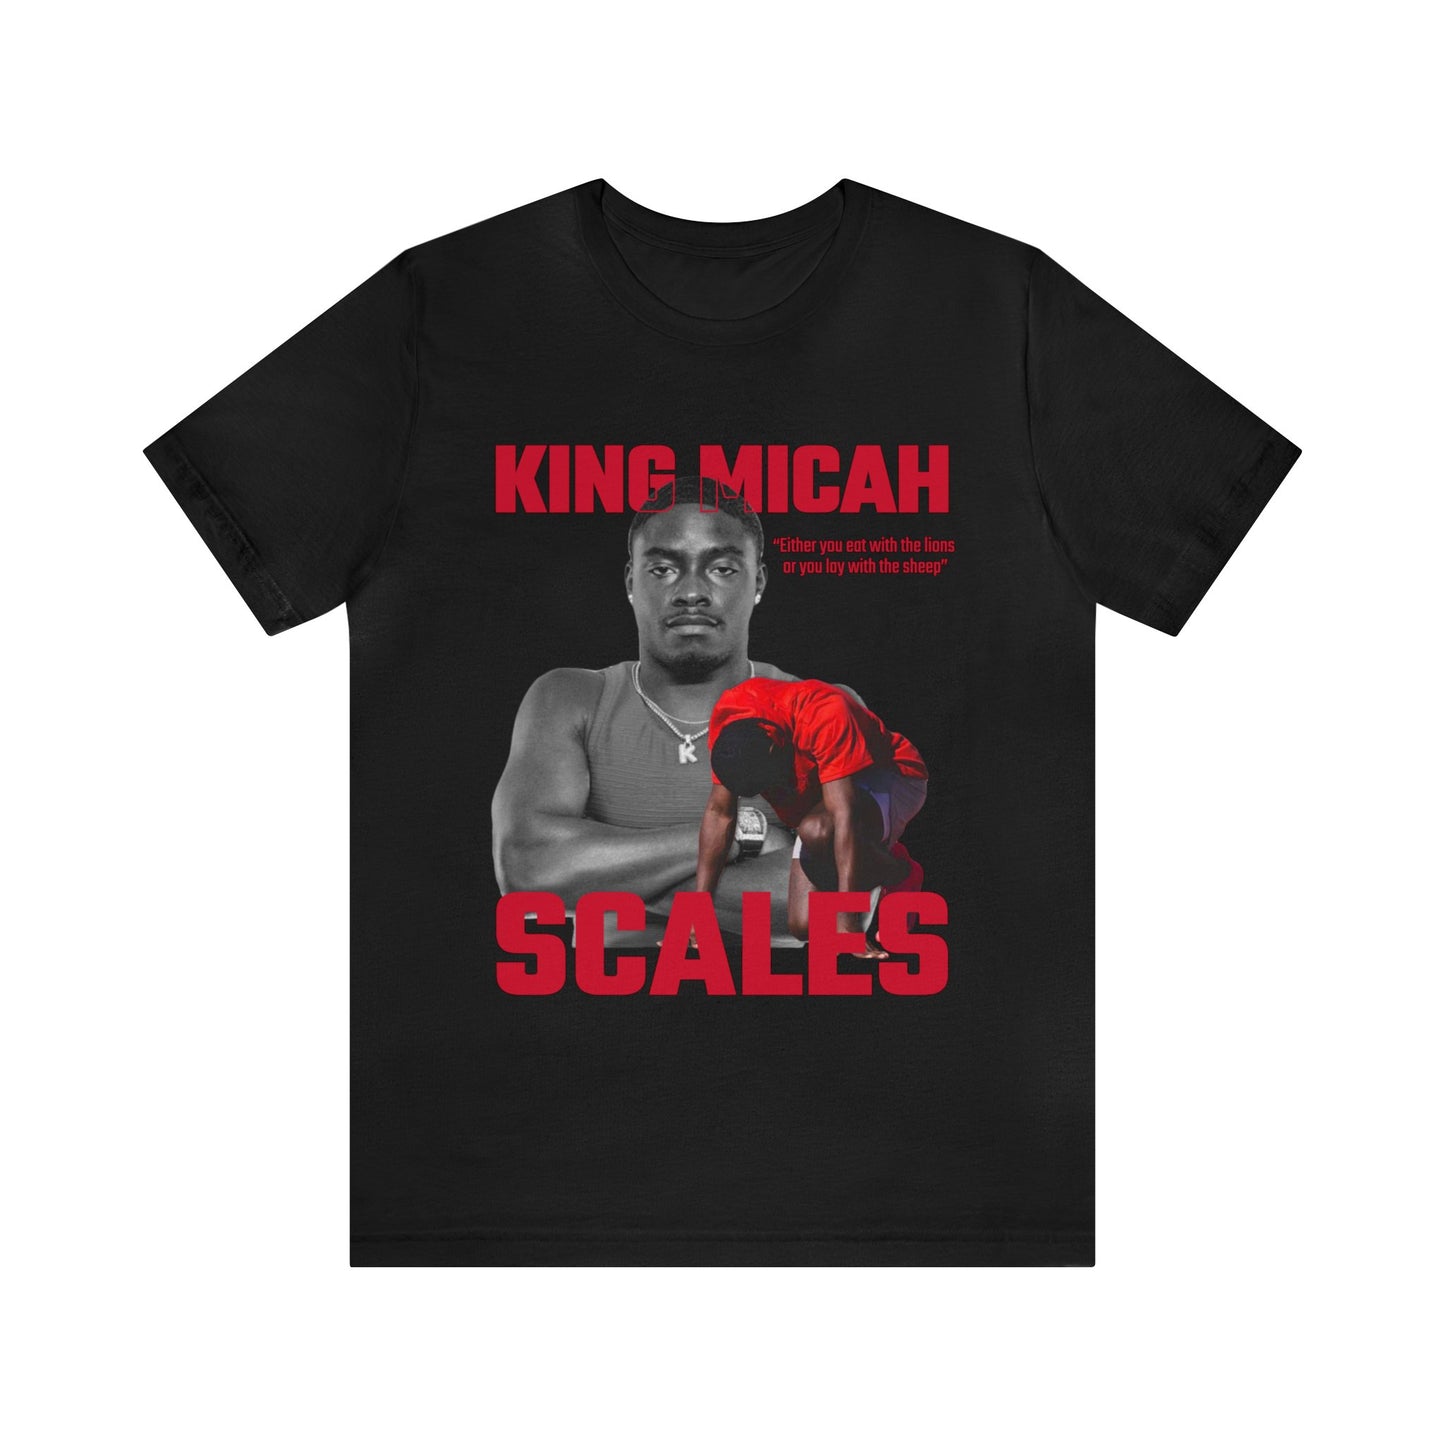 King Micah Scales: Either You Eat With The Lions Or You Lay With The Sheep Tee